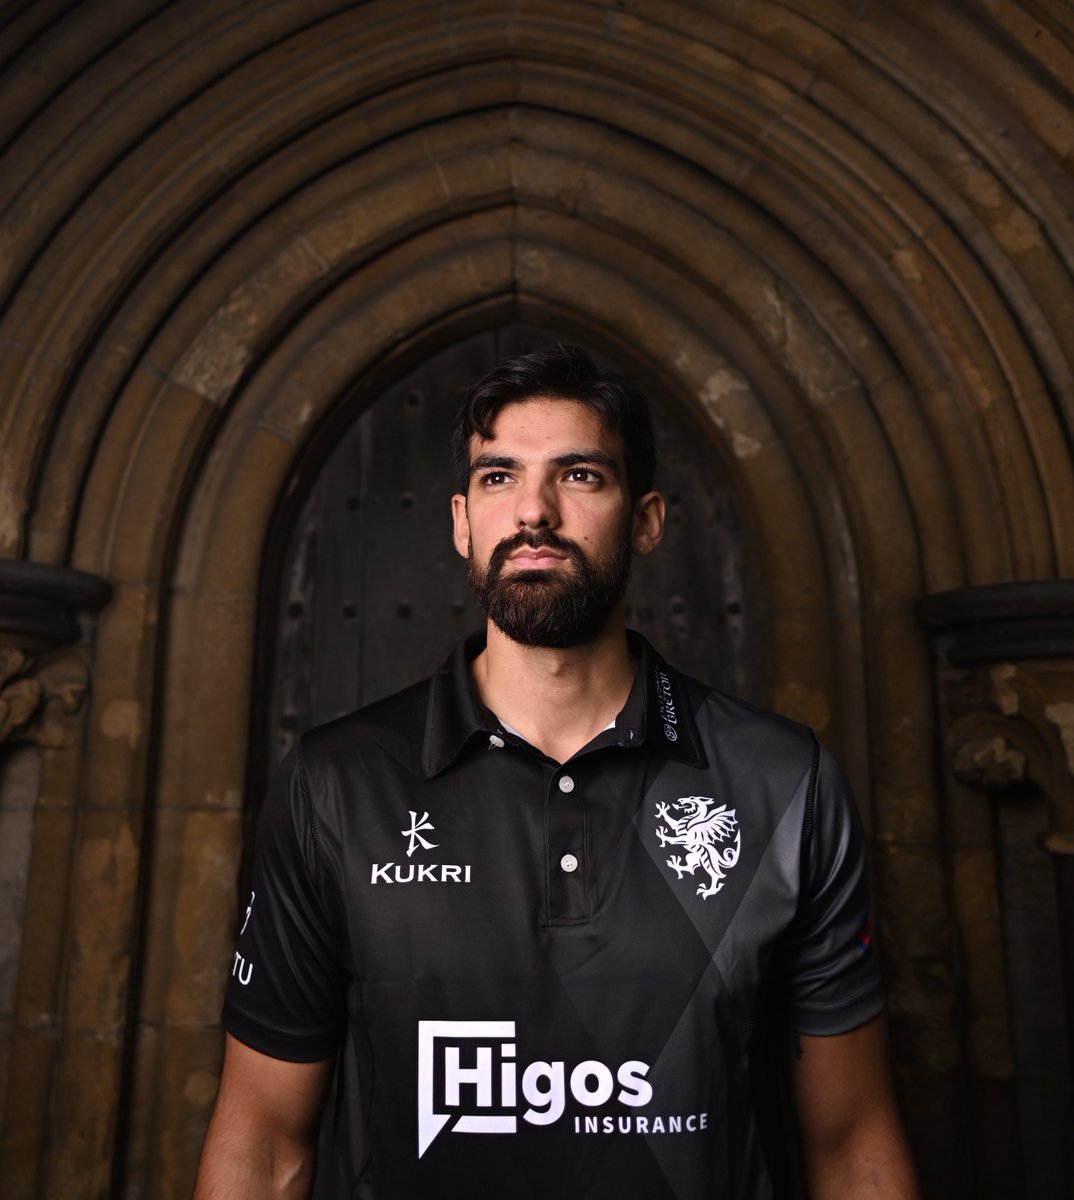 COMPETITION: Somerset CCC and Higos Insurance are giving you the chance to win a signed copy of the new @onedaycup shirt!! 🔥🔥 To be in with a chance simply like, repost and follow @HigosInsurance! Winner chosen at random on Saturday #WeAreSomerset #OurRegionRises